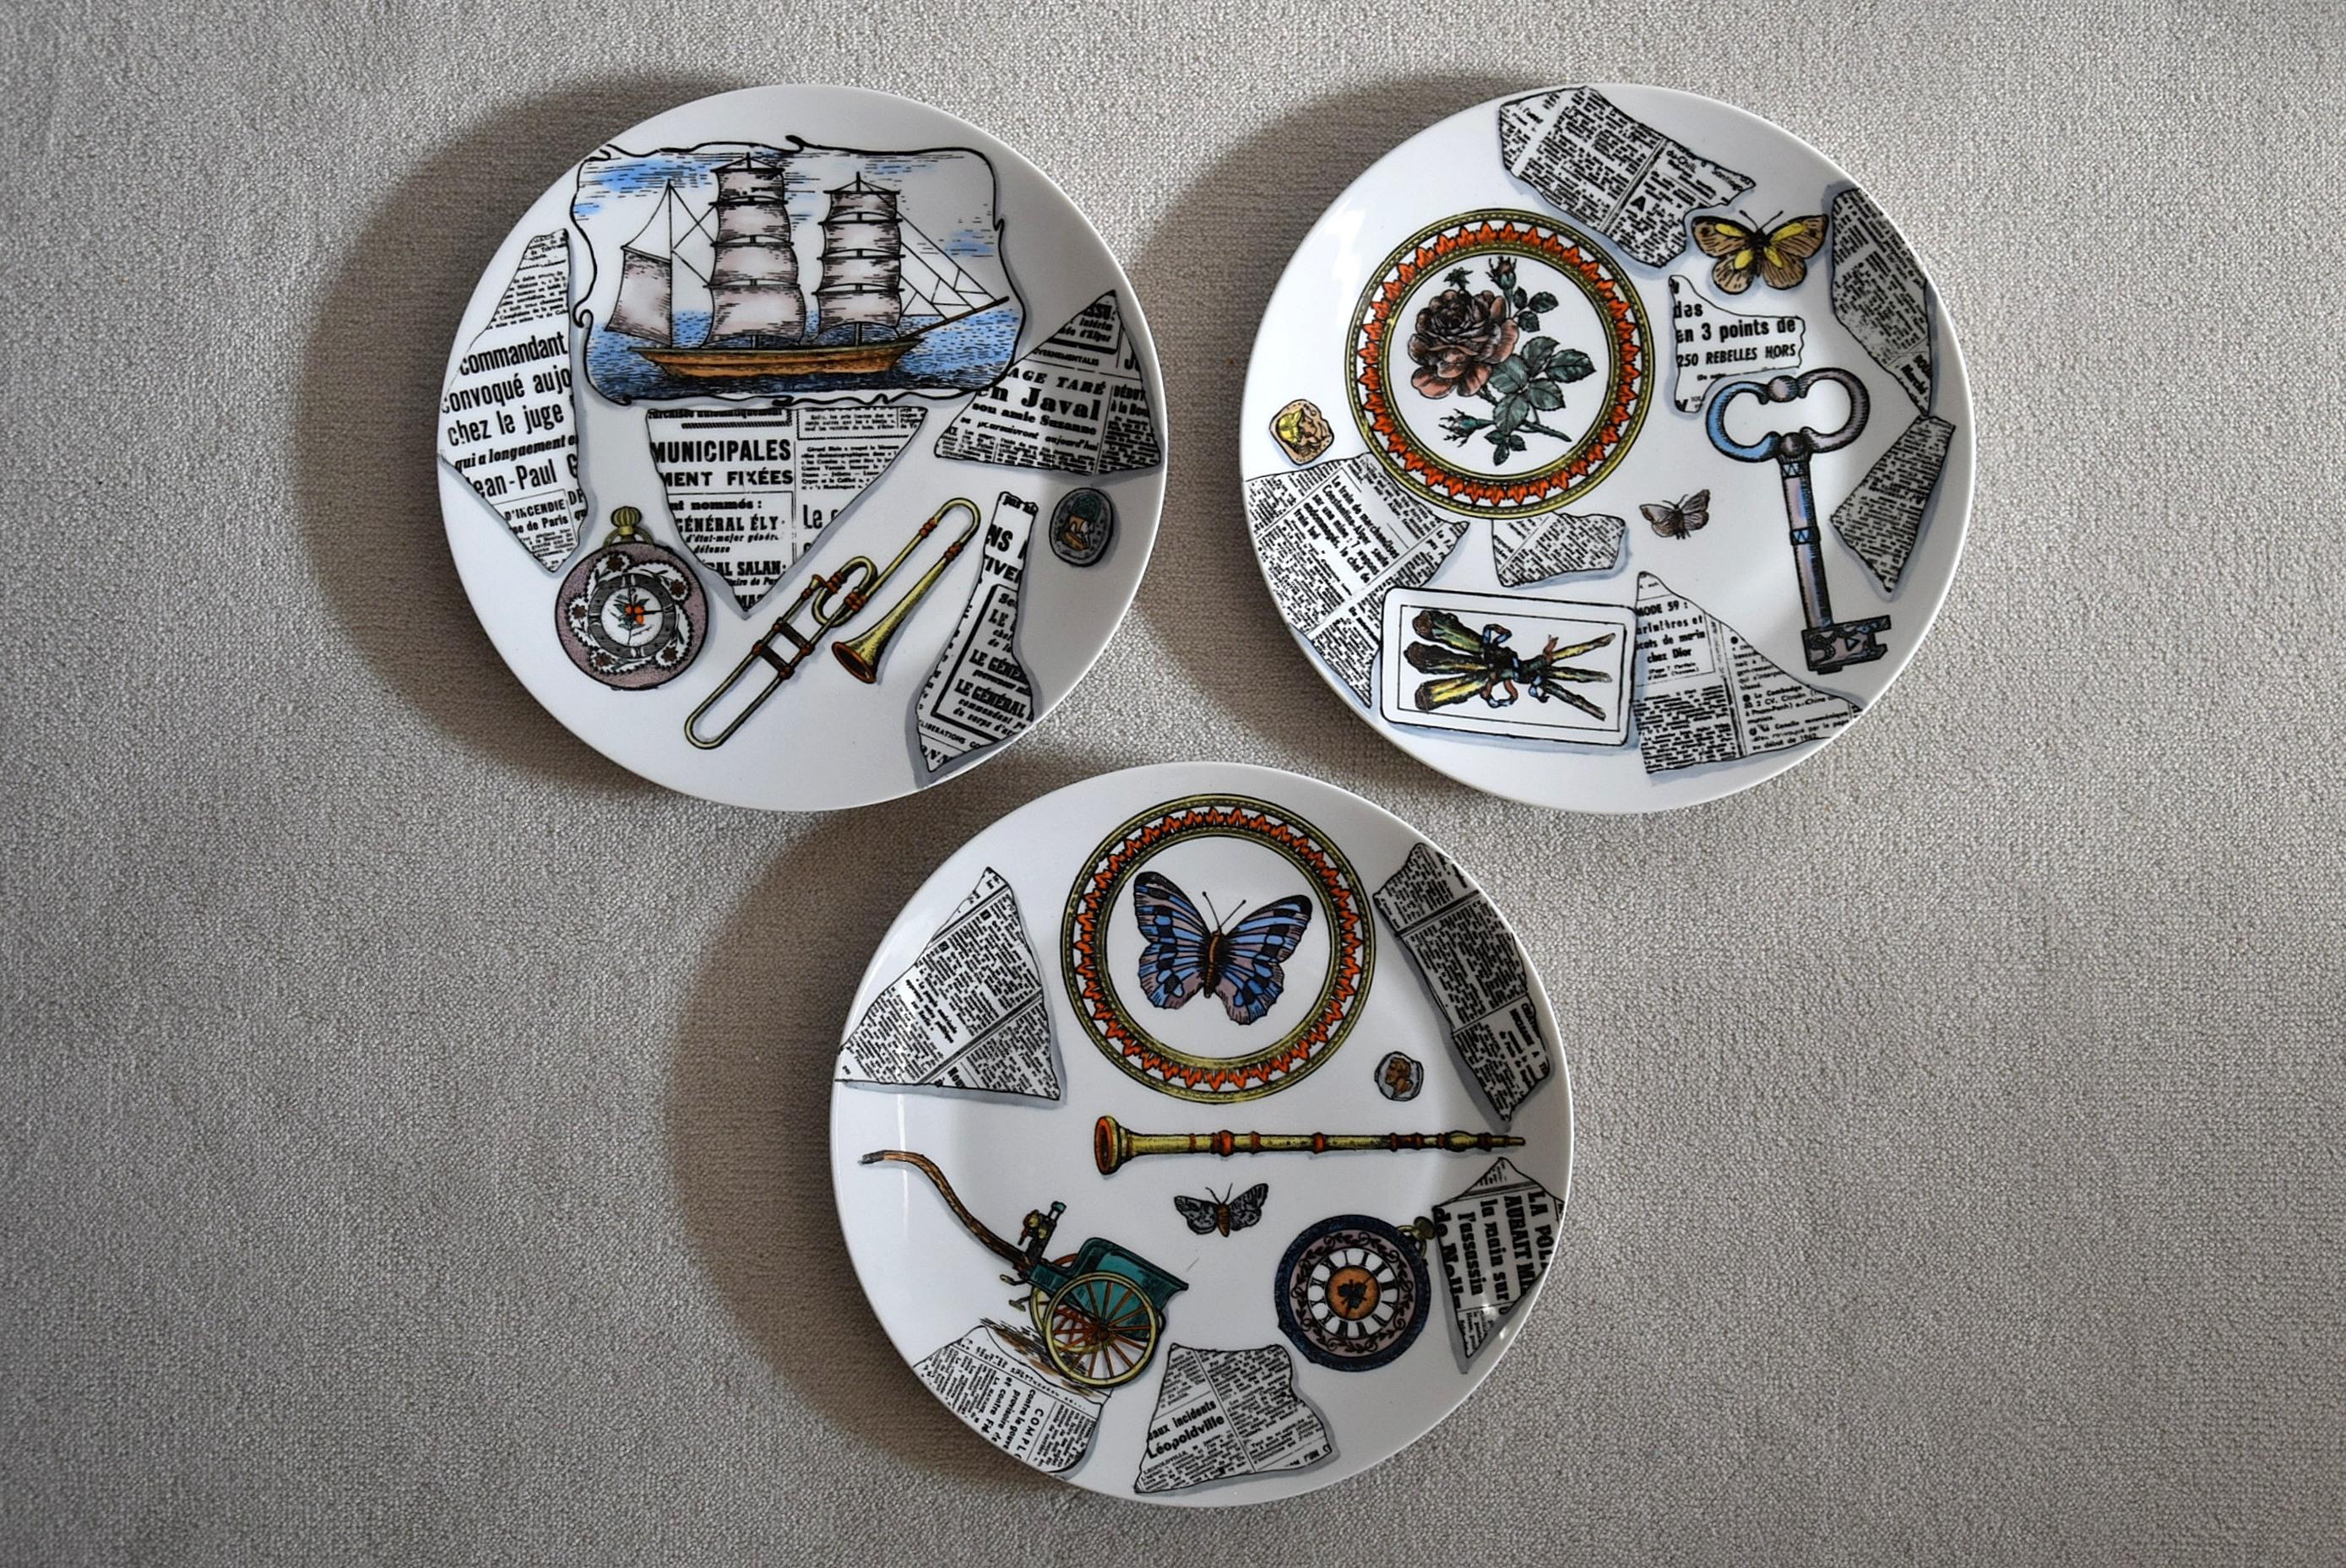 Three rare porcelain plates decorated and made by Bucciarelli, Milano in the 1960's.

The plates have a diameter of 26 cm and are in great condition. No damage.